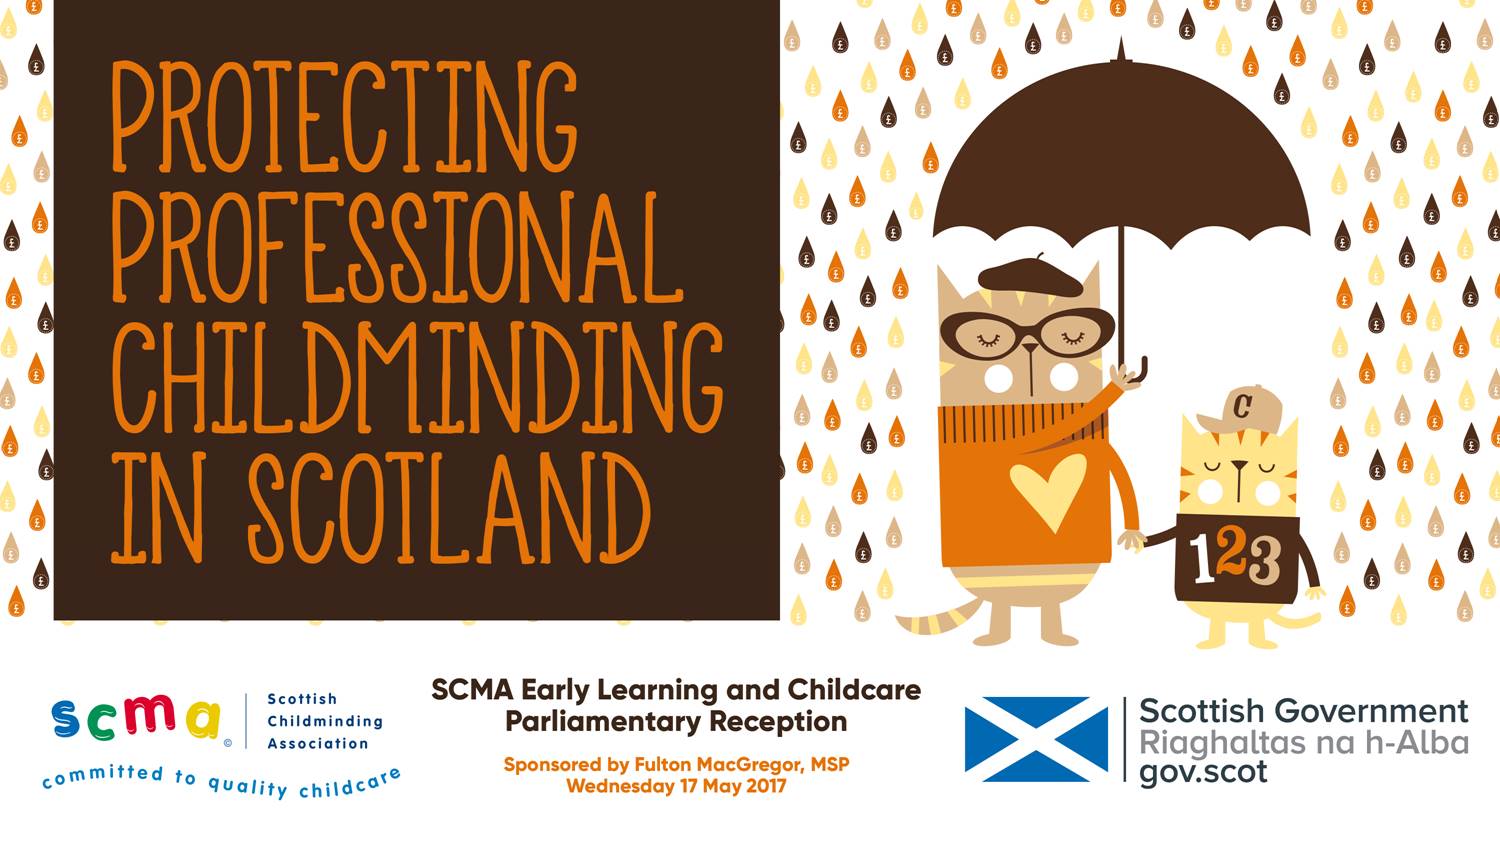 Protecting professional childminding in Scotland